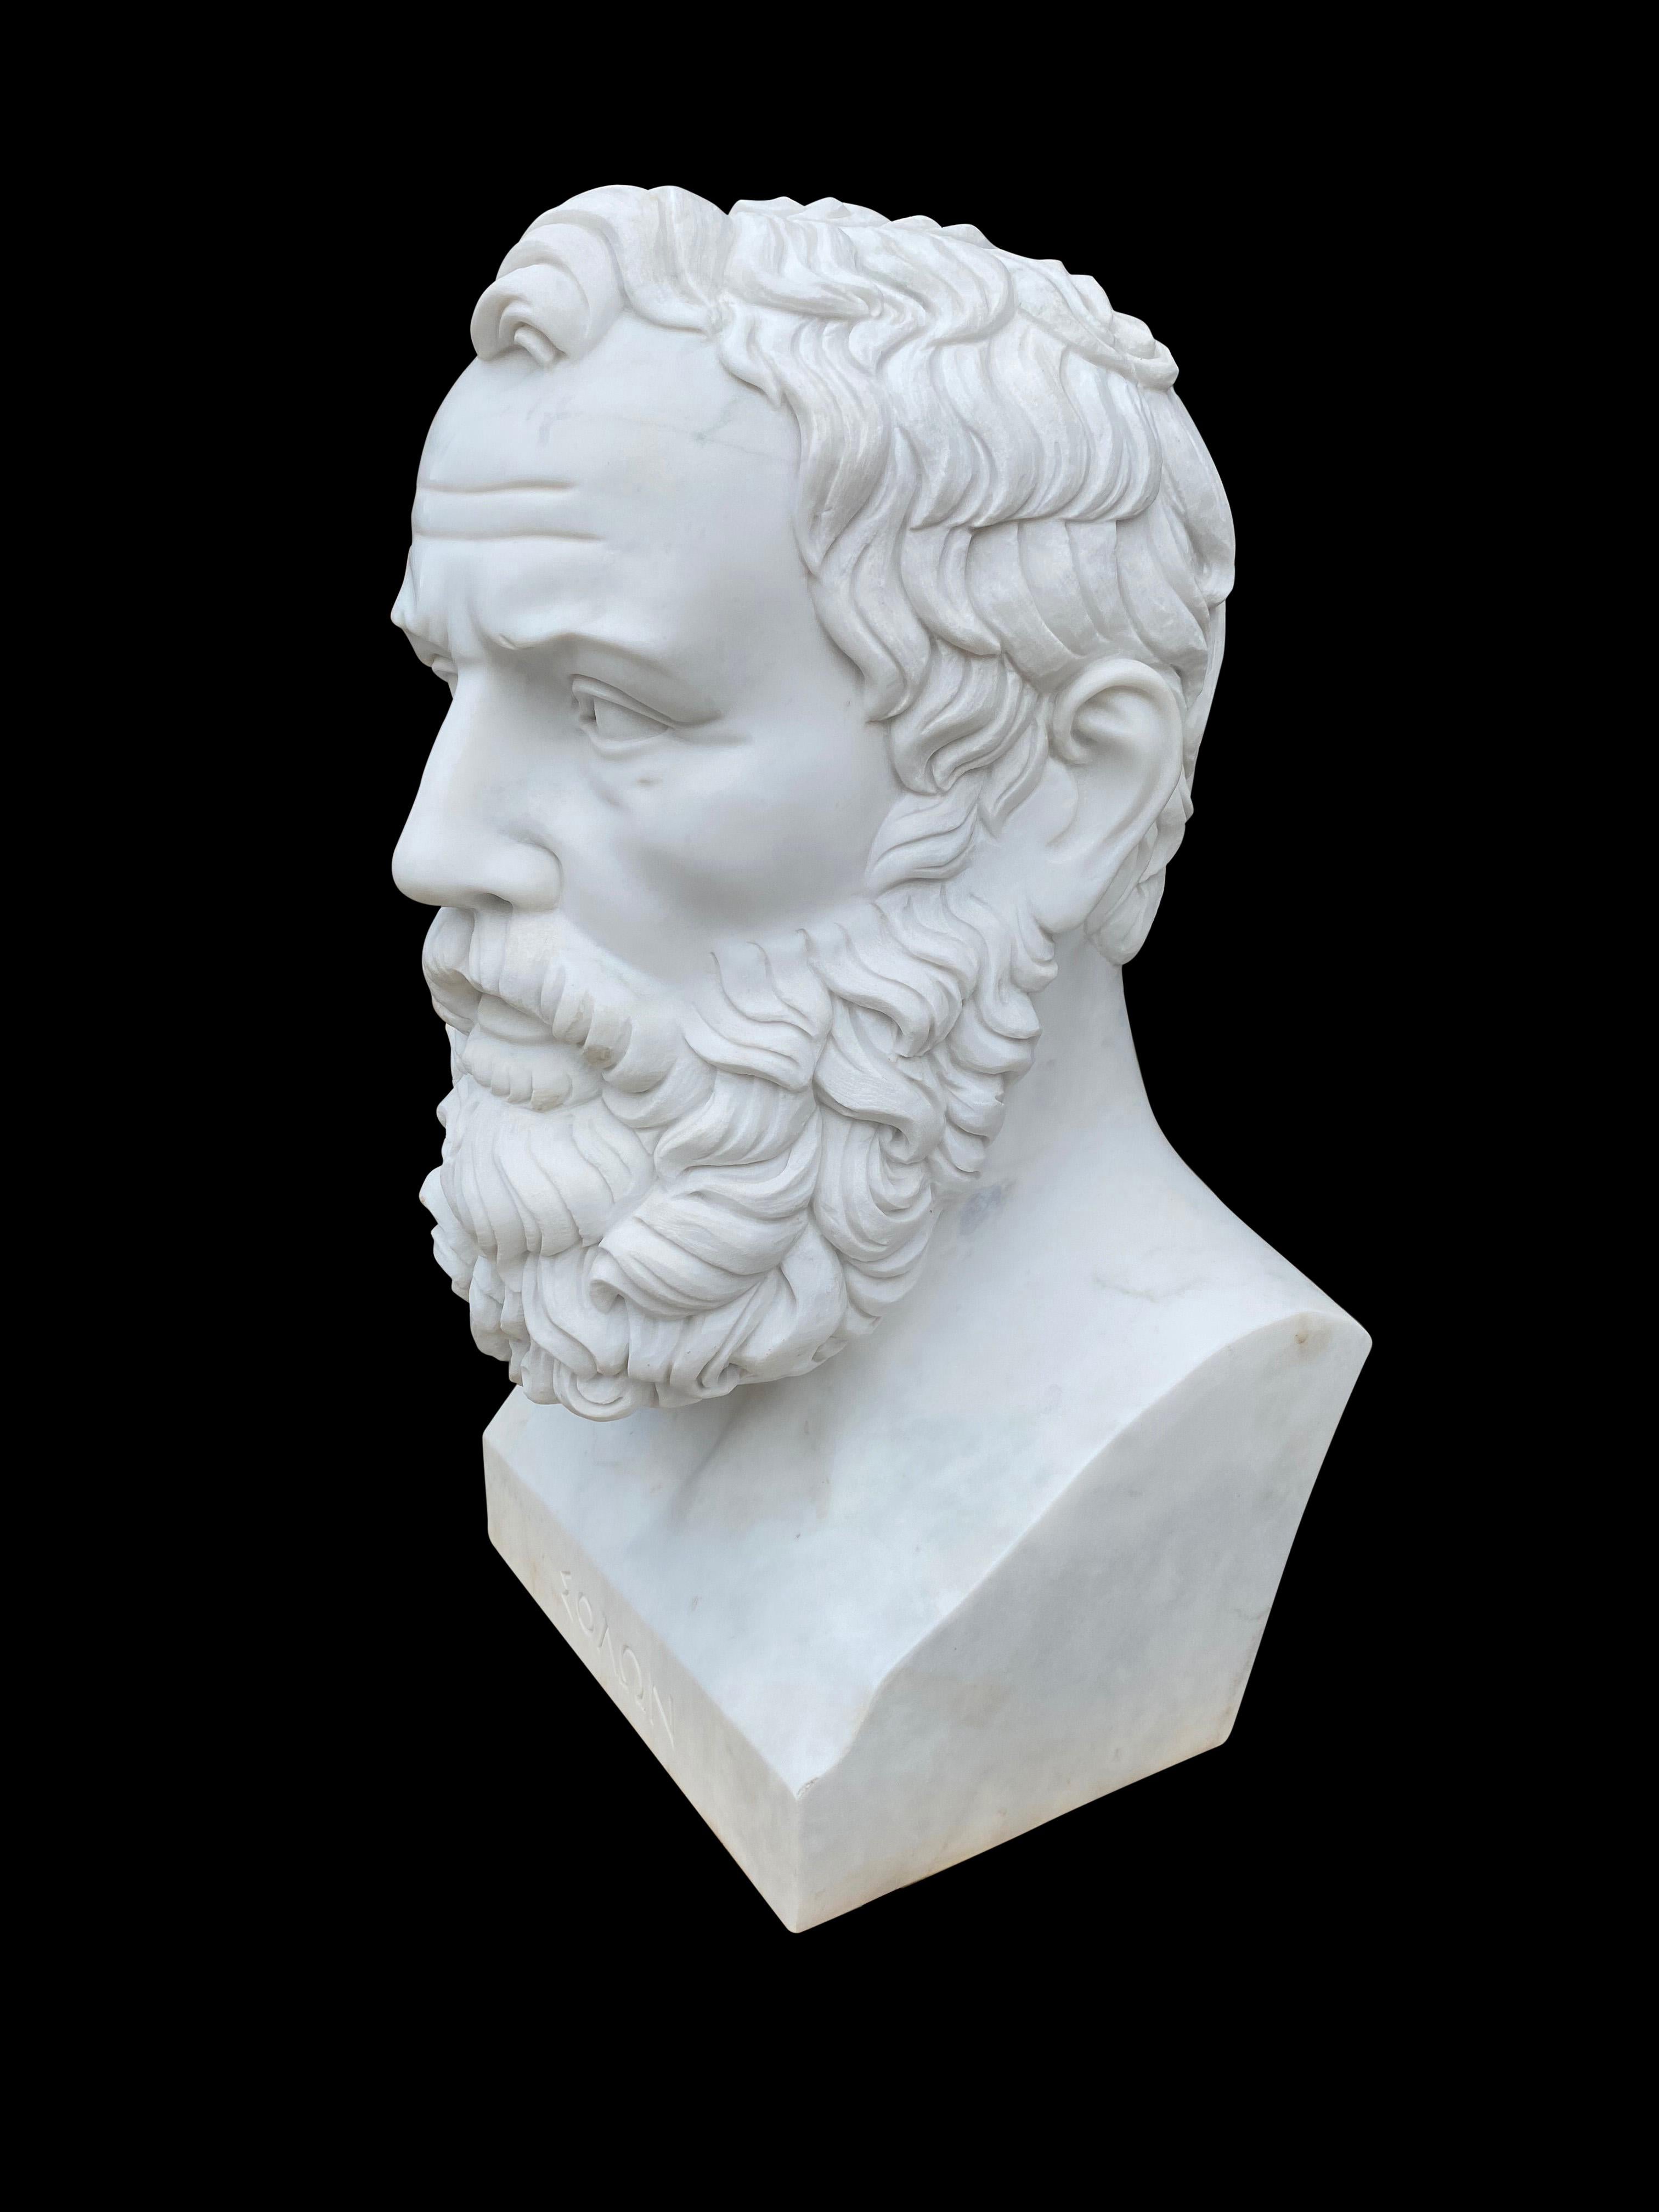 20th Century Marble Bust of Solon Greek Lawmaker, Statesman and Poet For Sale 1